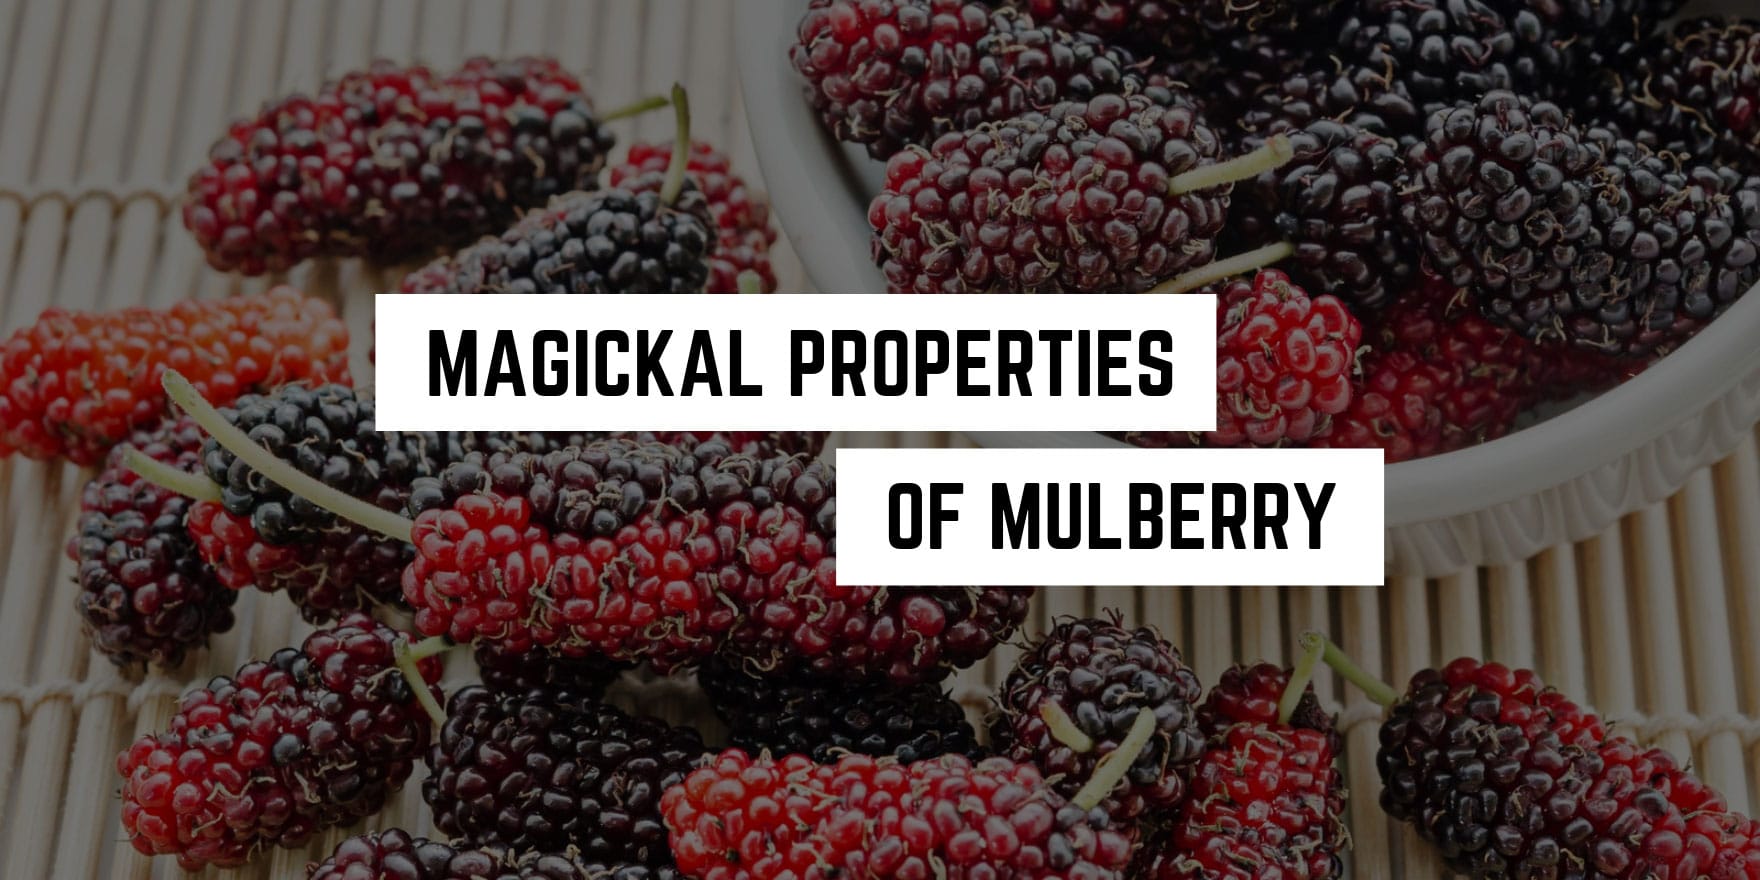 A spread of ripe and unripe mulberries with text overlay highlighting "occult properties of mulberry.